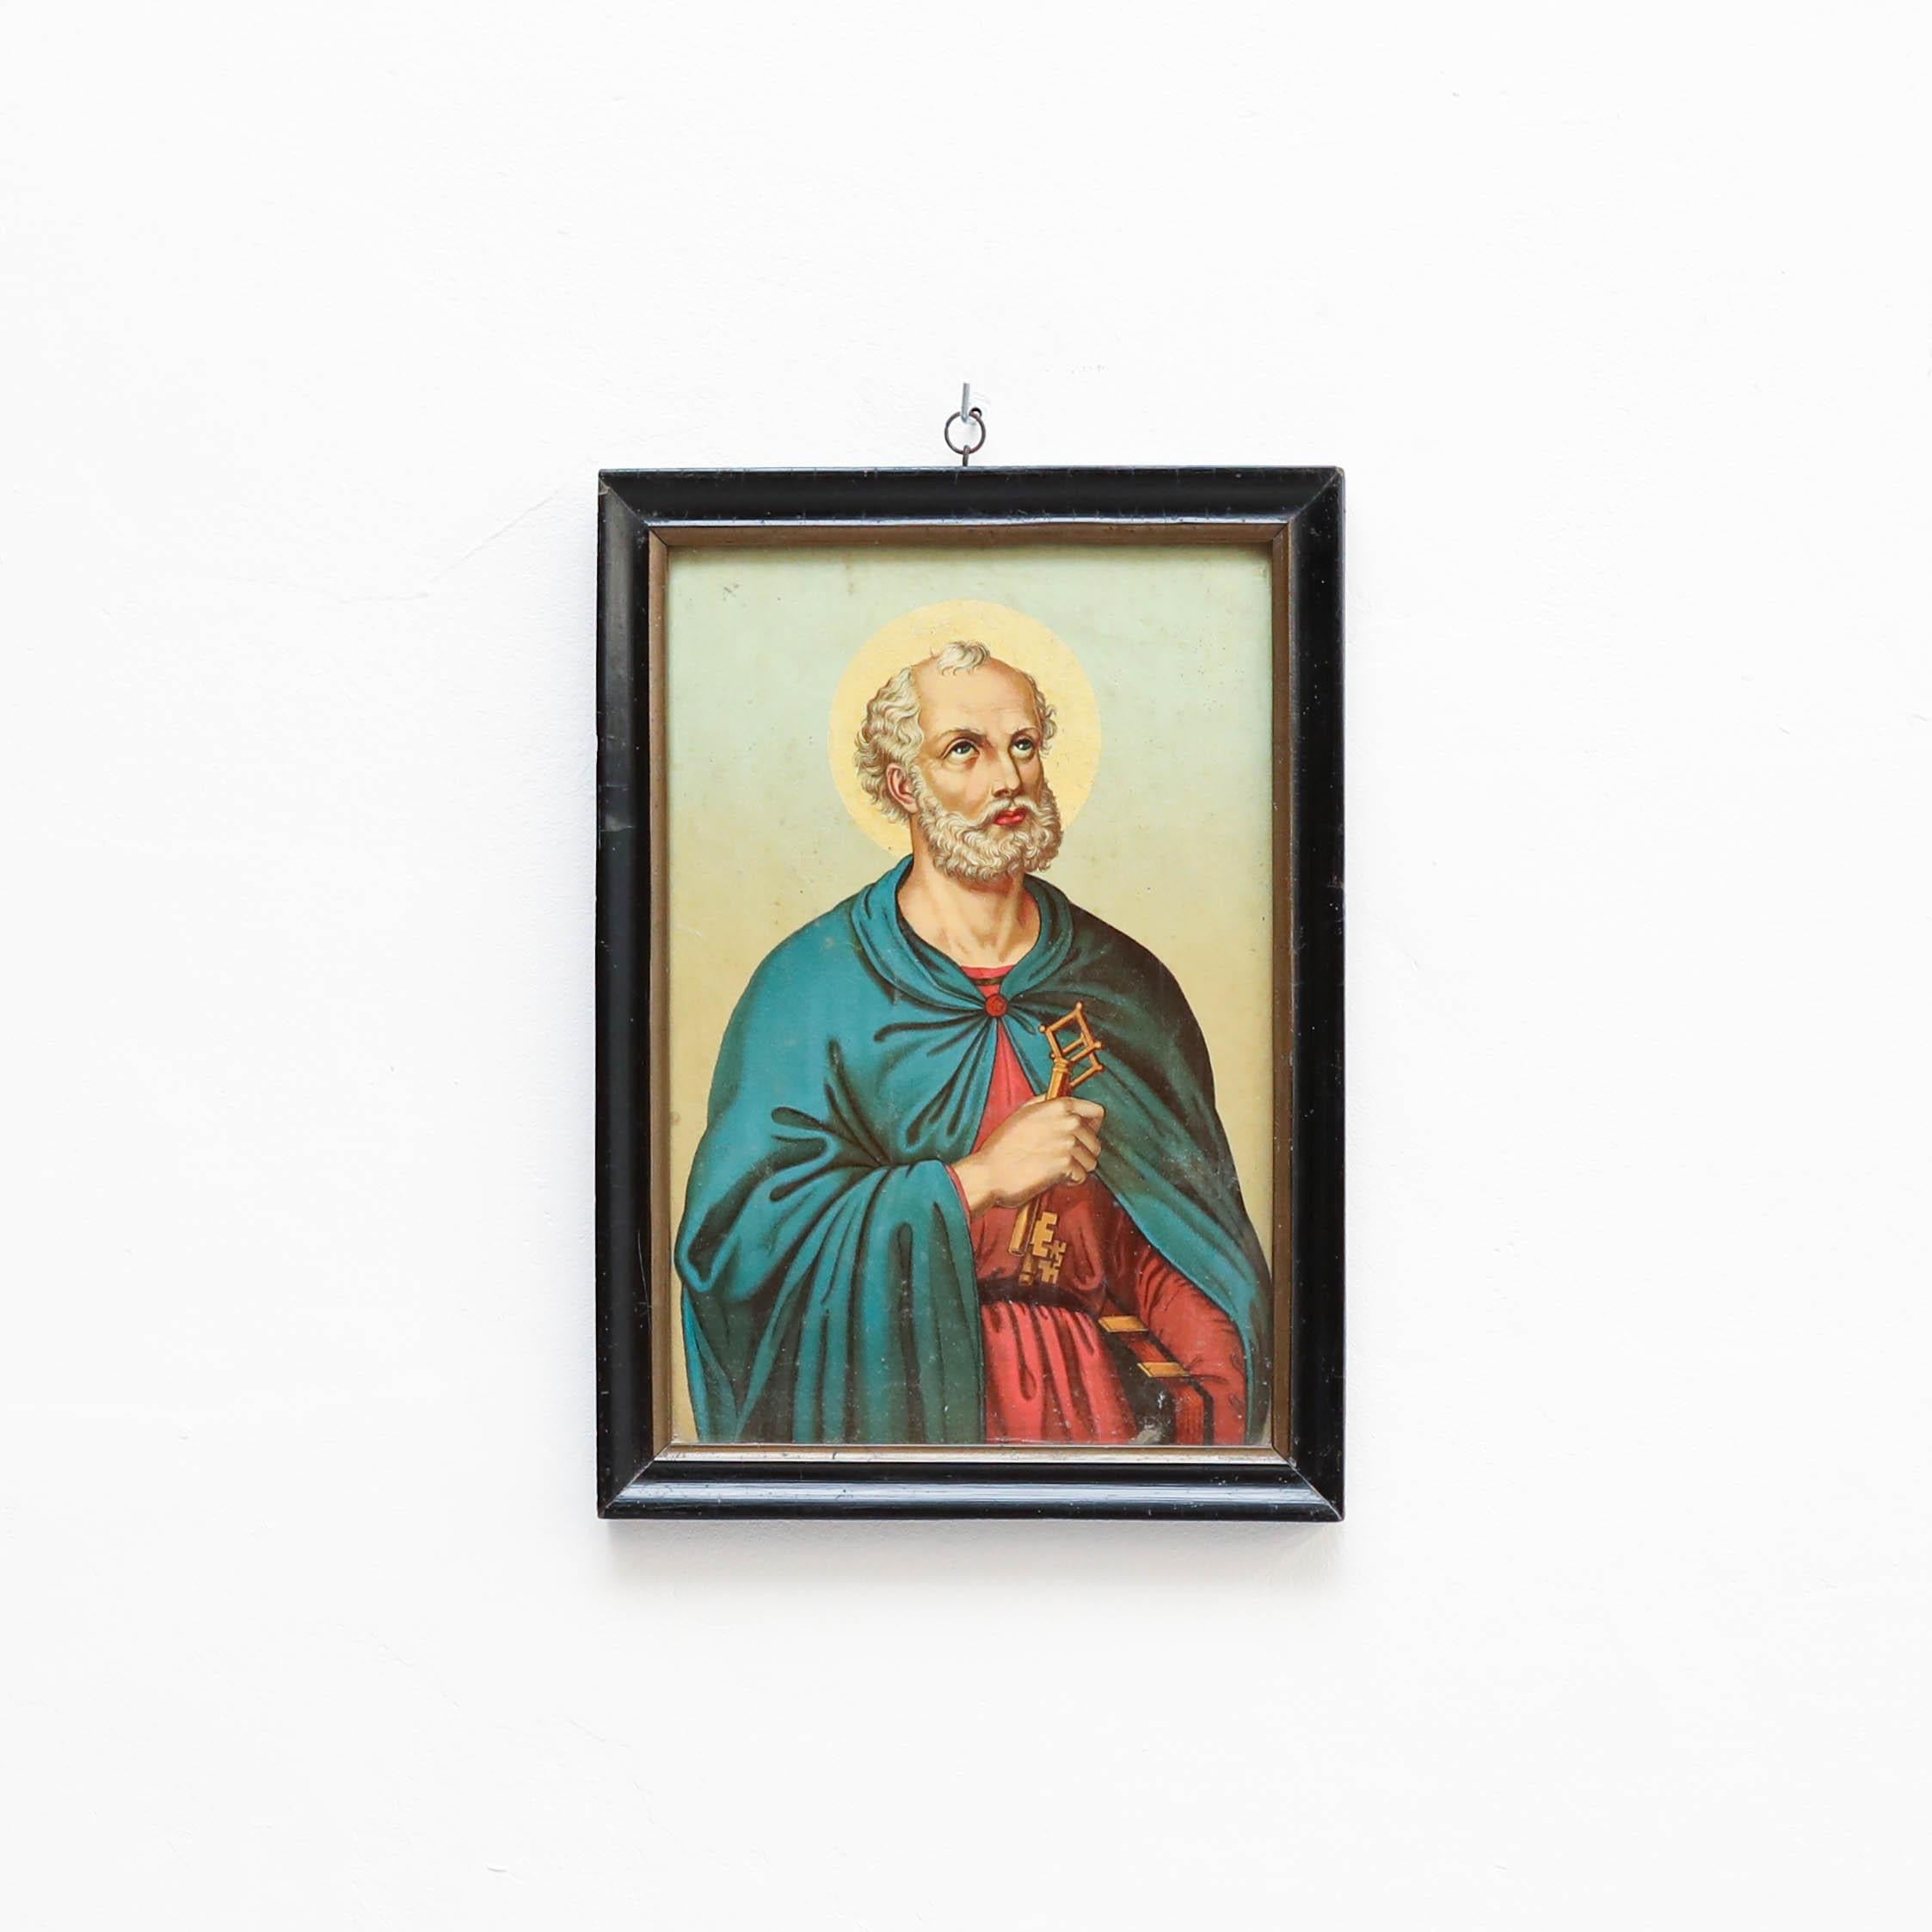 Framed print of Saint Peter with the keys to heaven.

By unknown artist, circa 1940.

In original condition, with some visible signs of previous use and age, preserving a beautiful patina.

